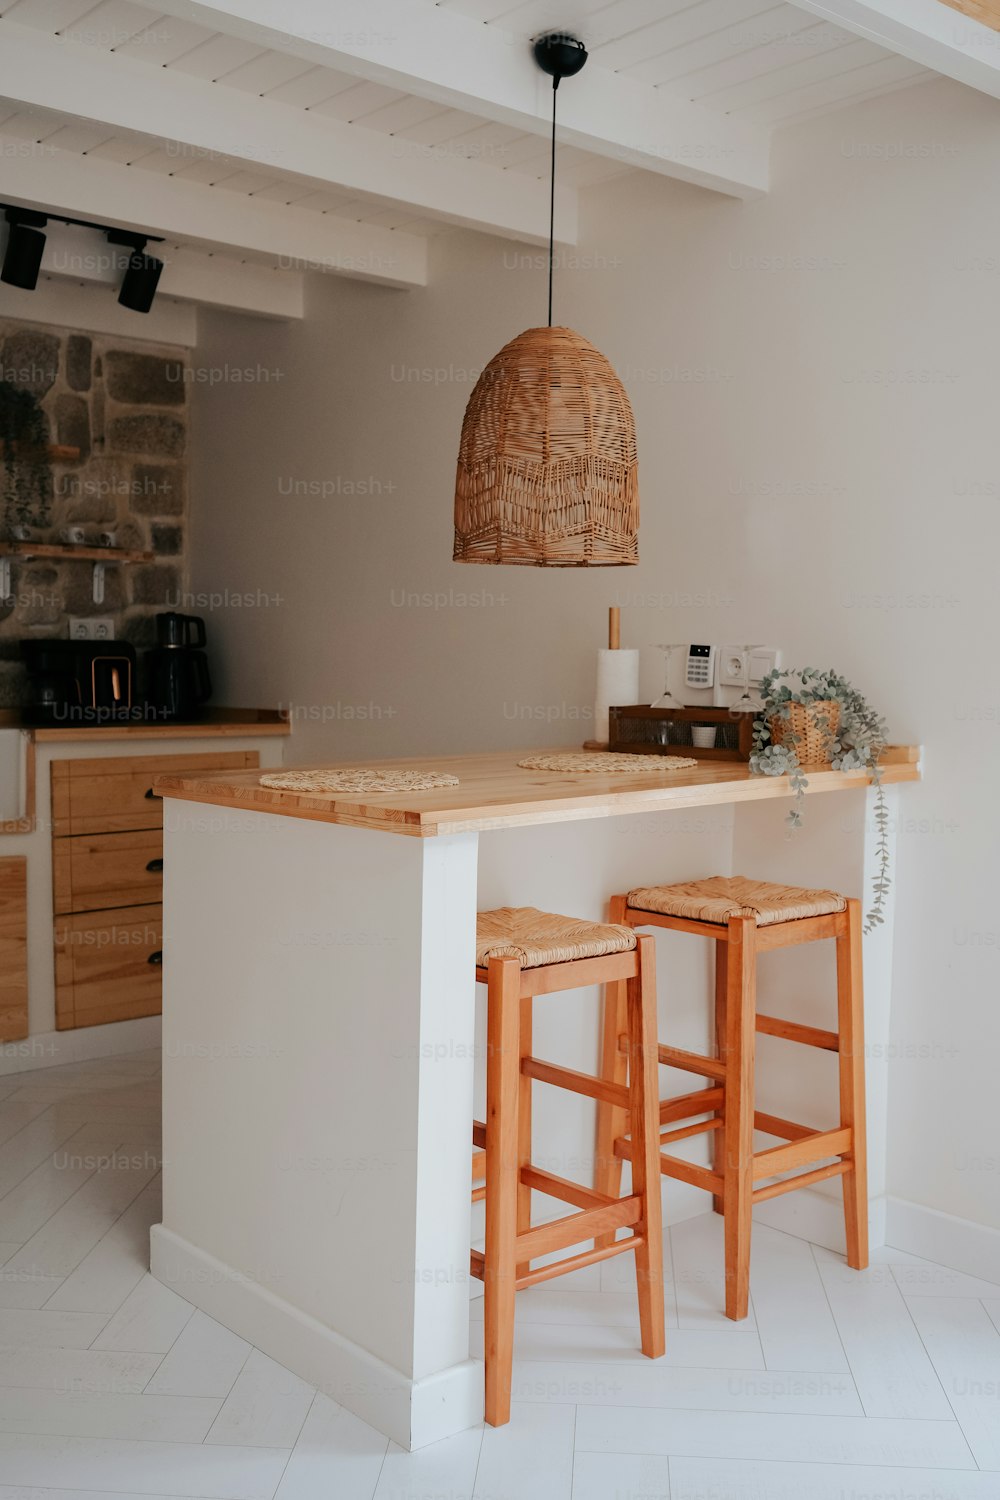 a kitchen with two stools next to a bar